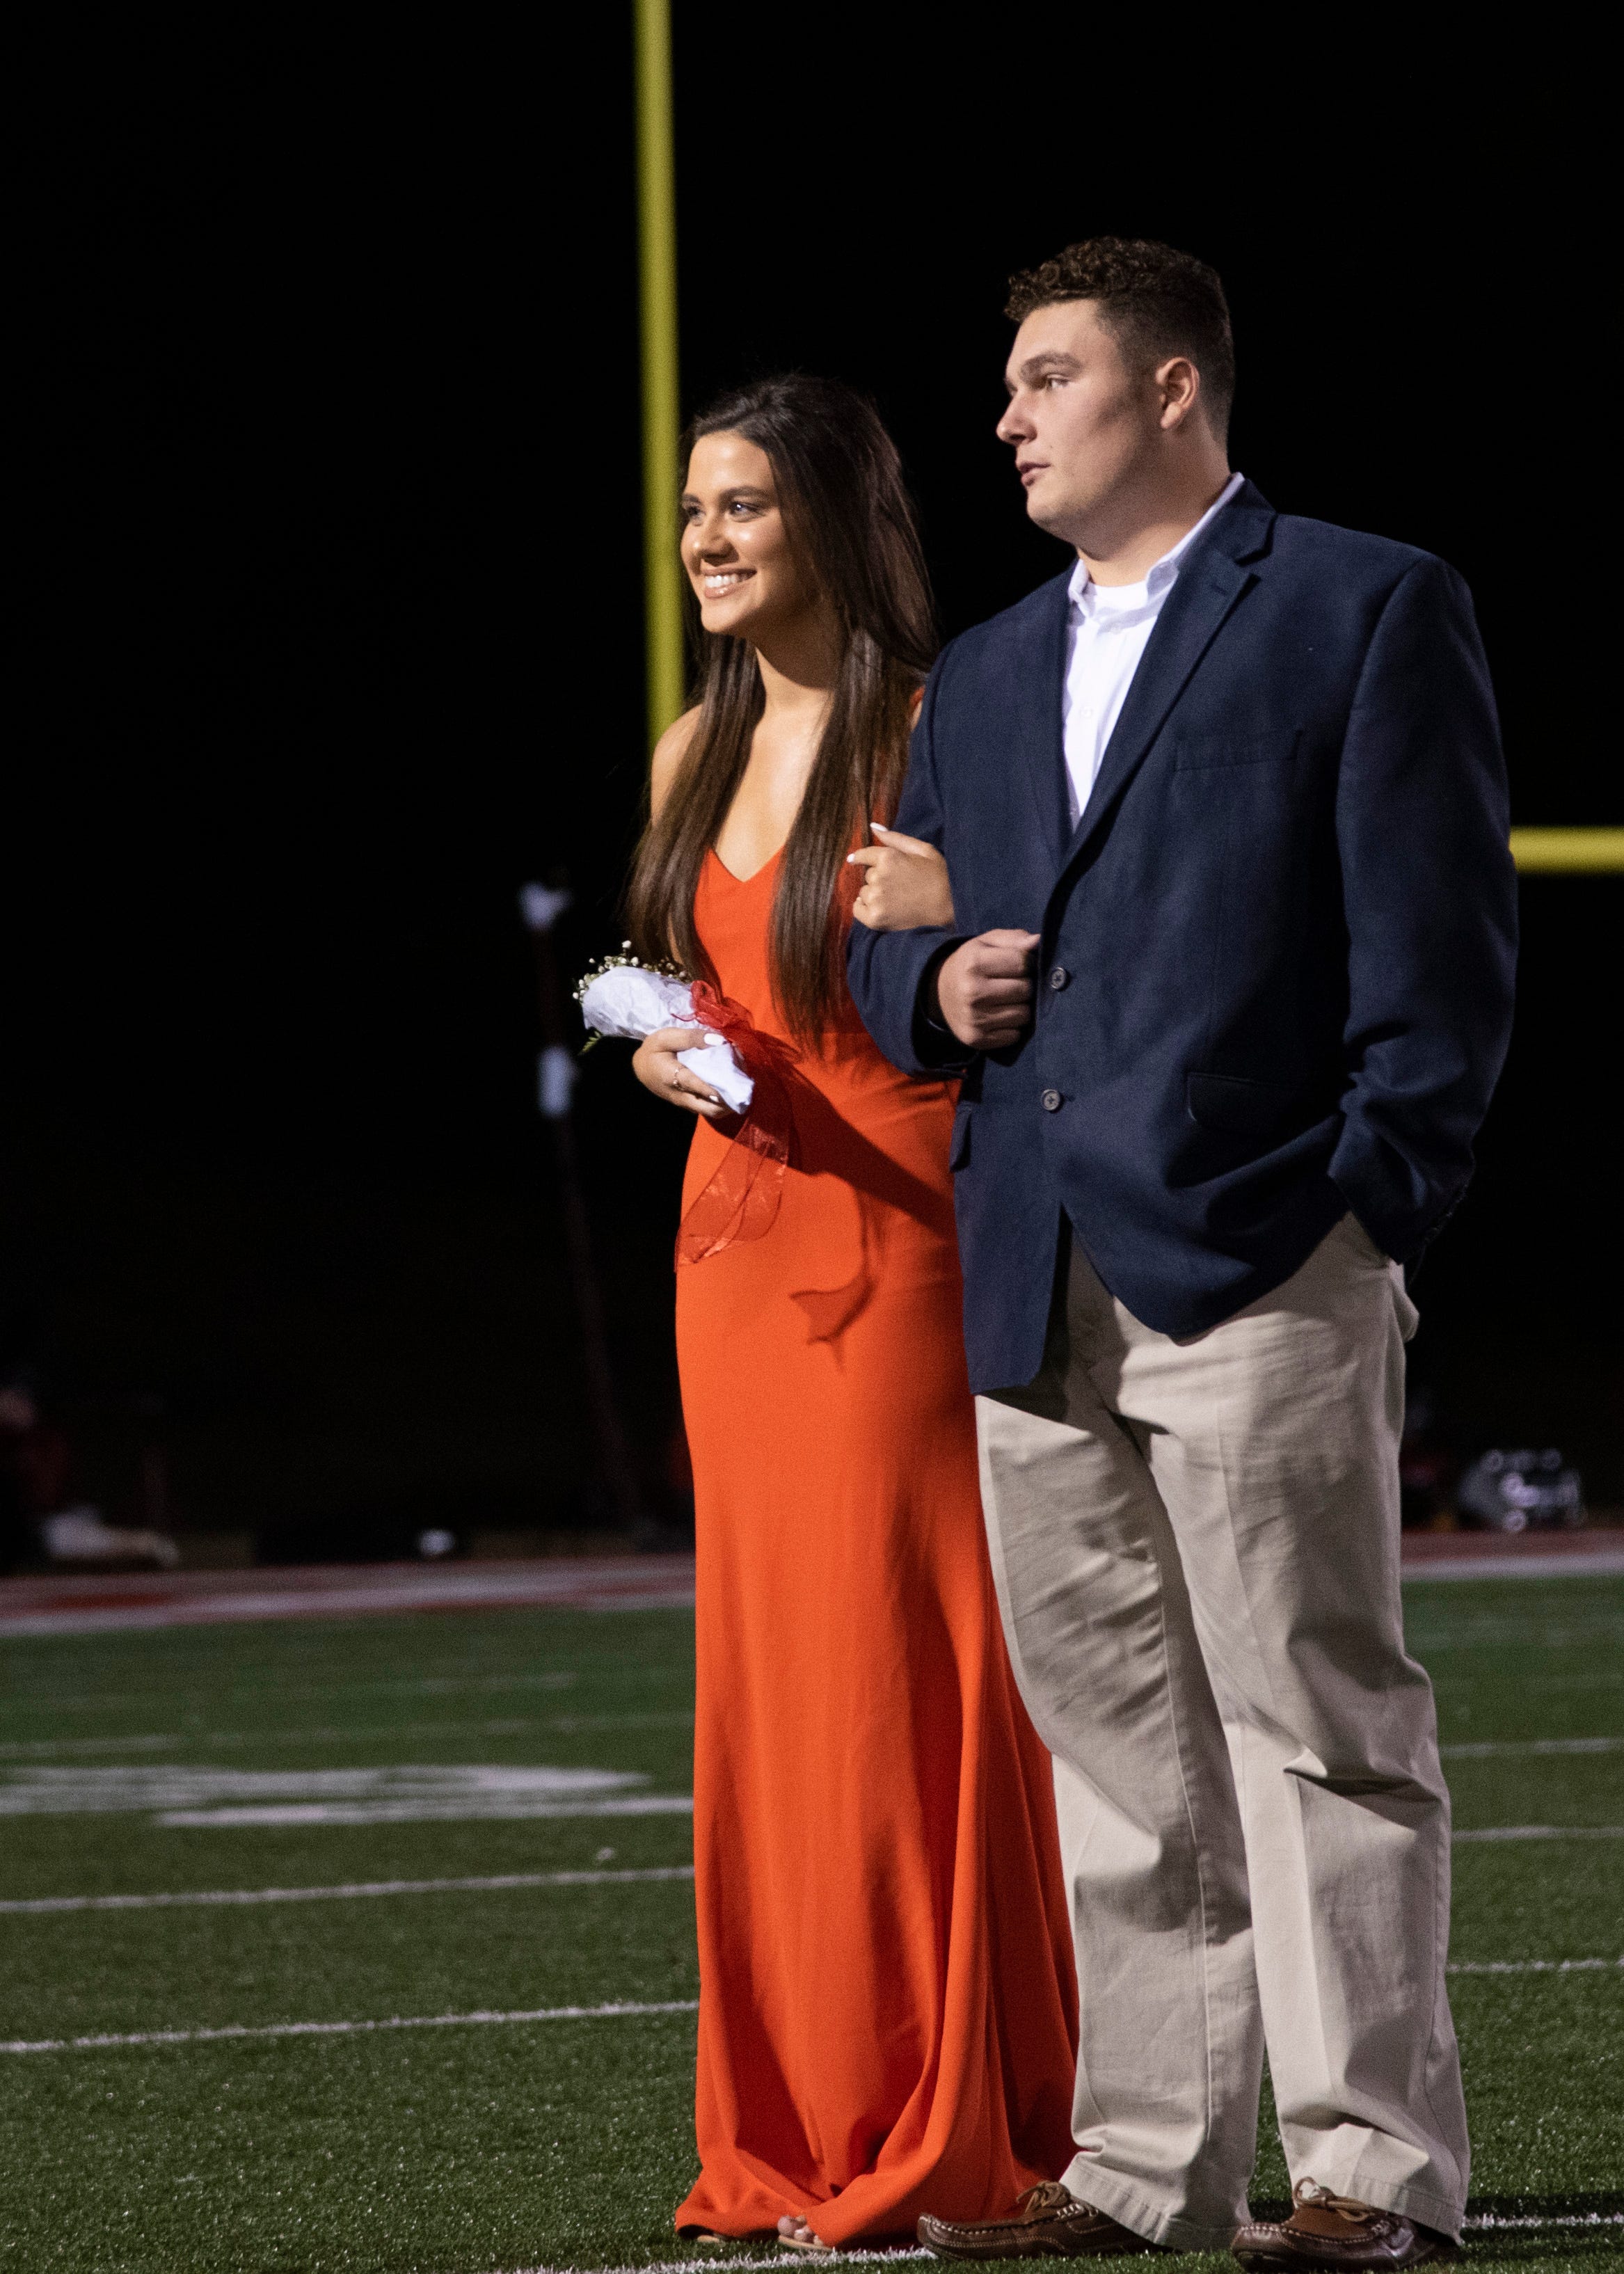 A Halls homecoming court member during the Halls and Central high school football game Friday, October 4, 2019, at Halls High School.